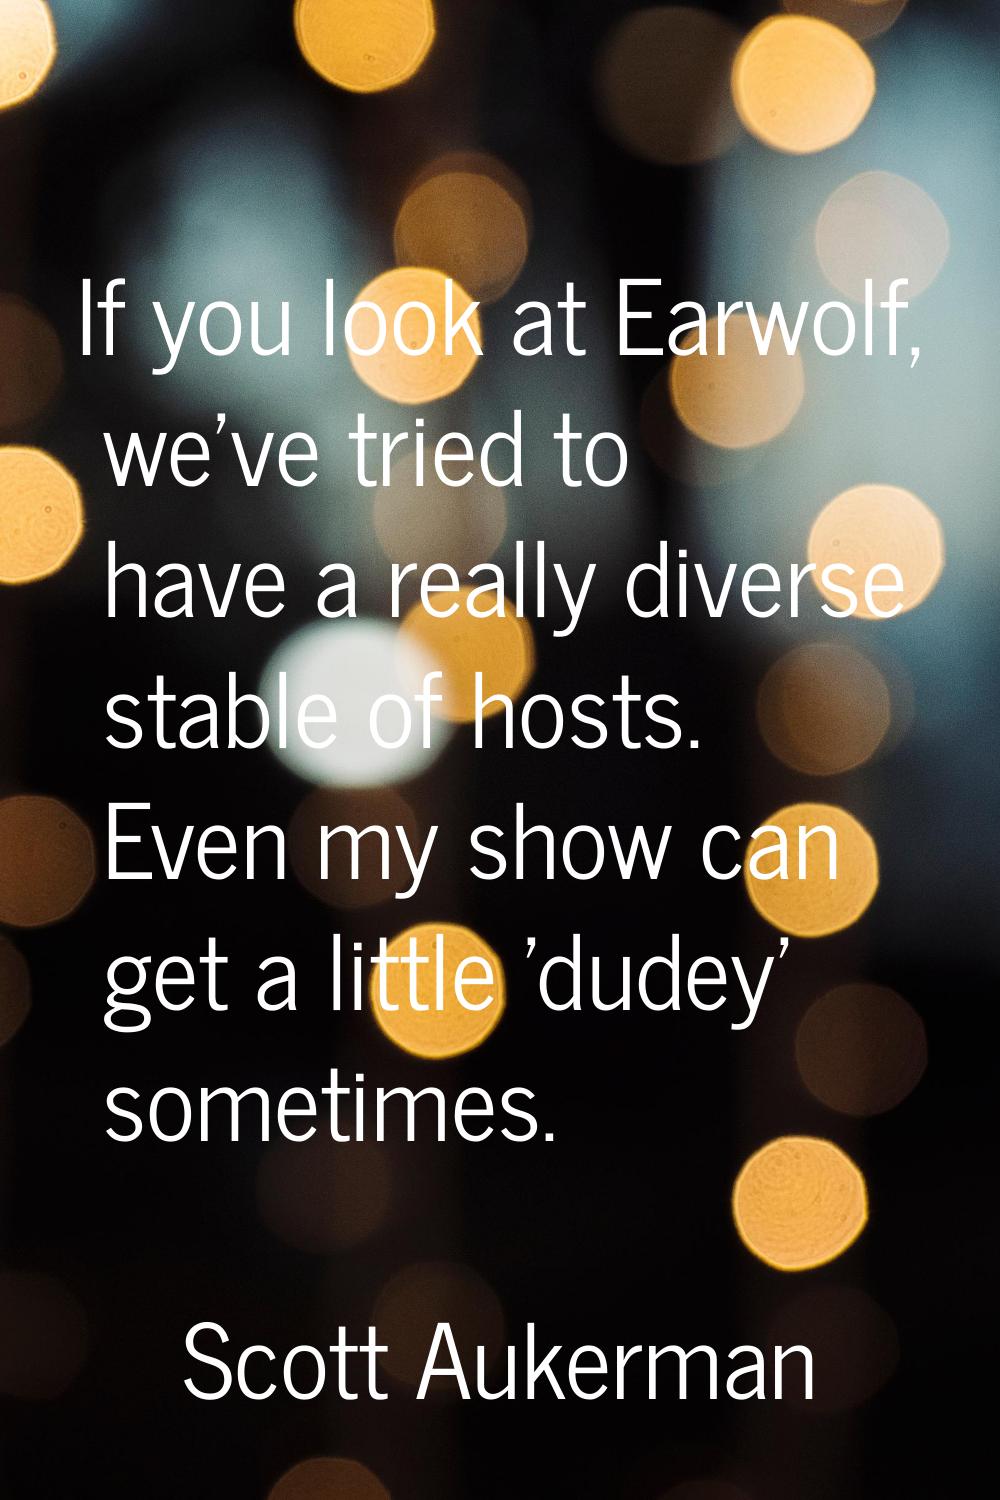 If you look at Earwolf, we've tried to have a really diverse stable of hosts. Even my show can get 